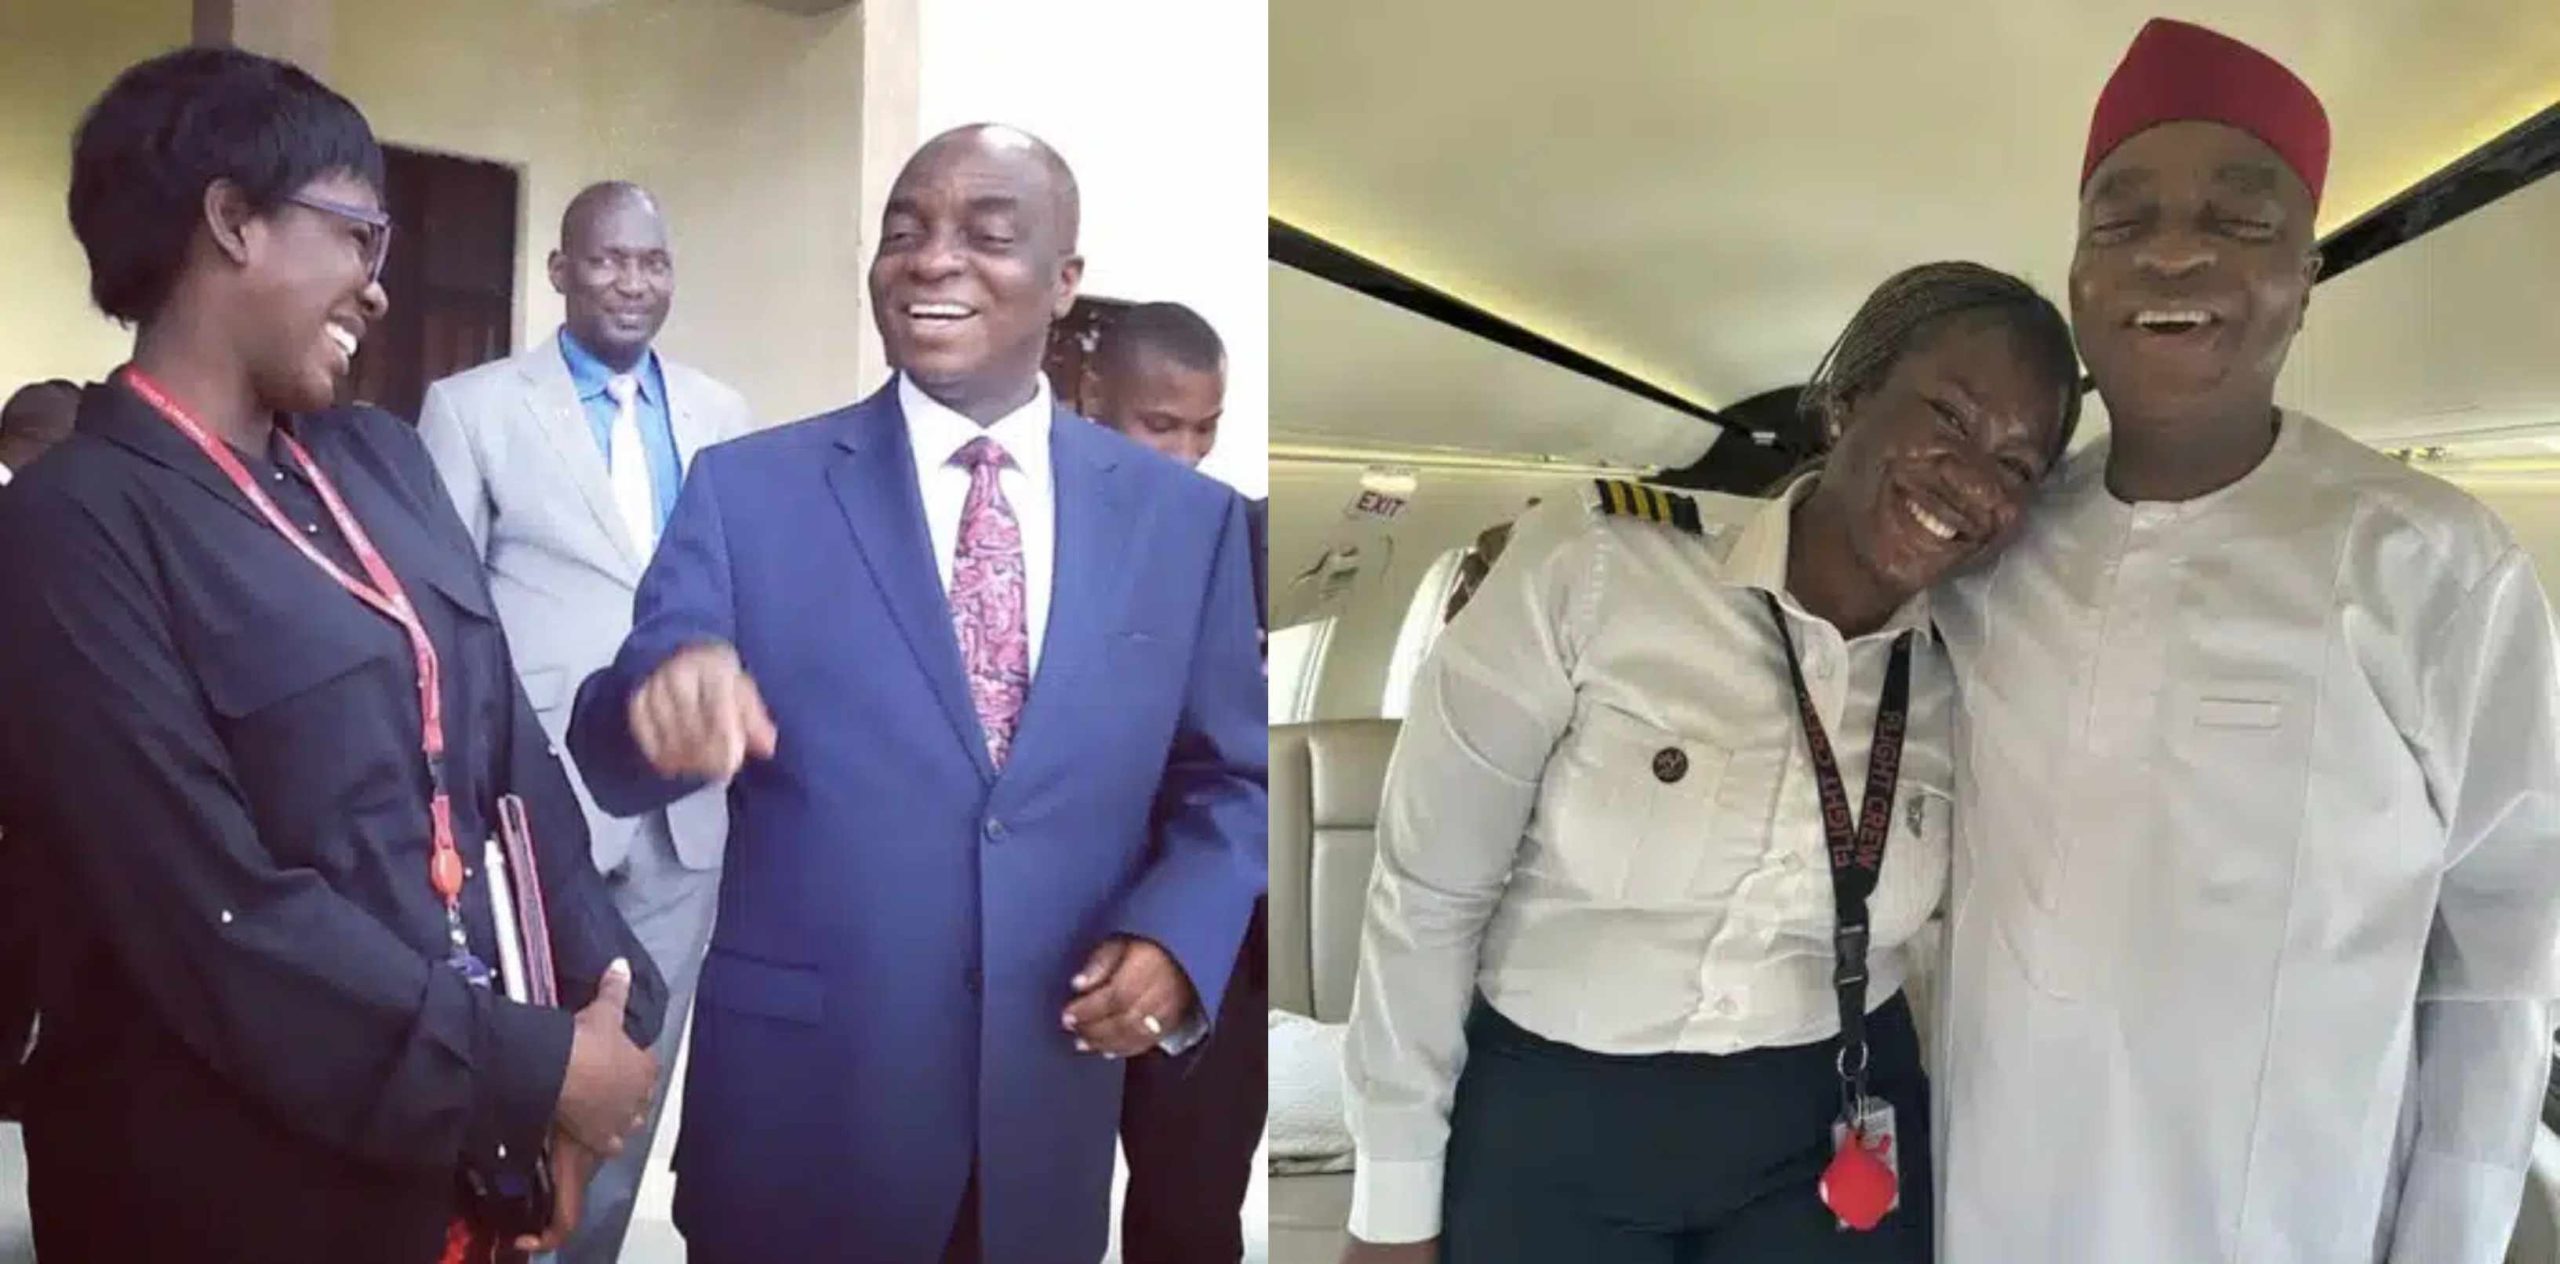 Lady overexcited as she flies Bishop David Oyedepo